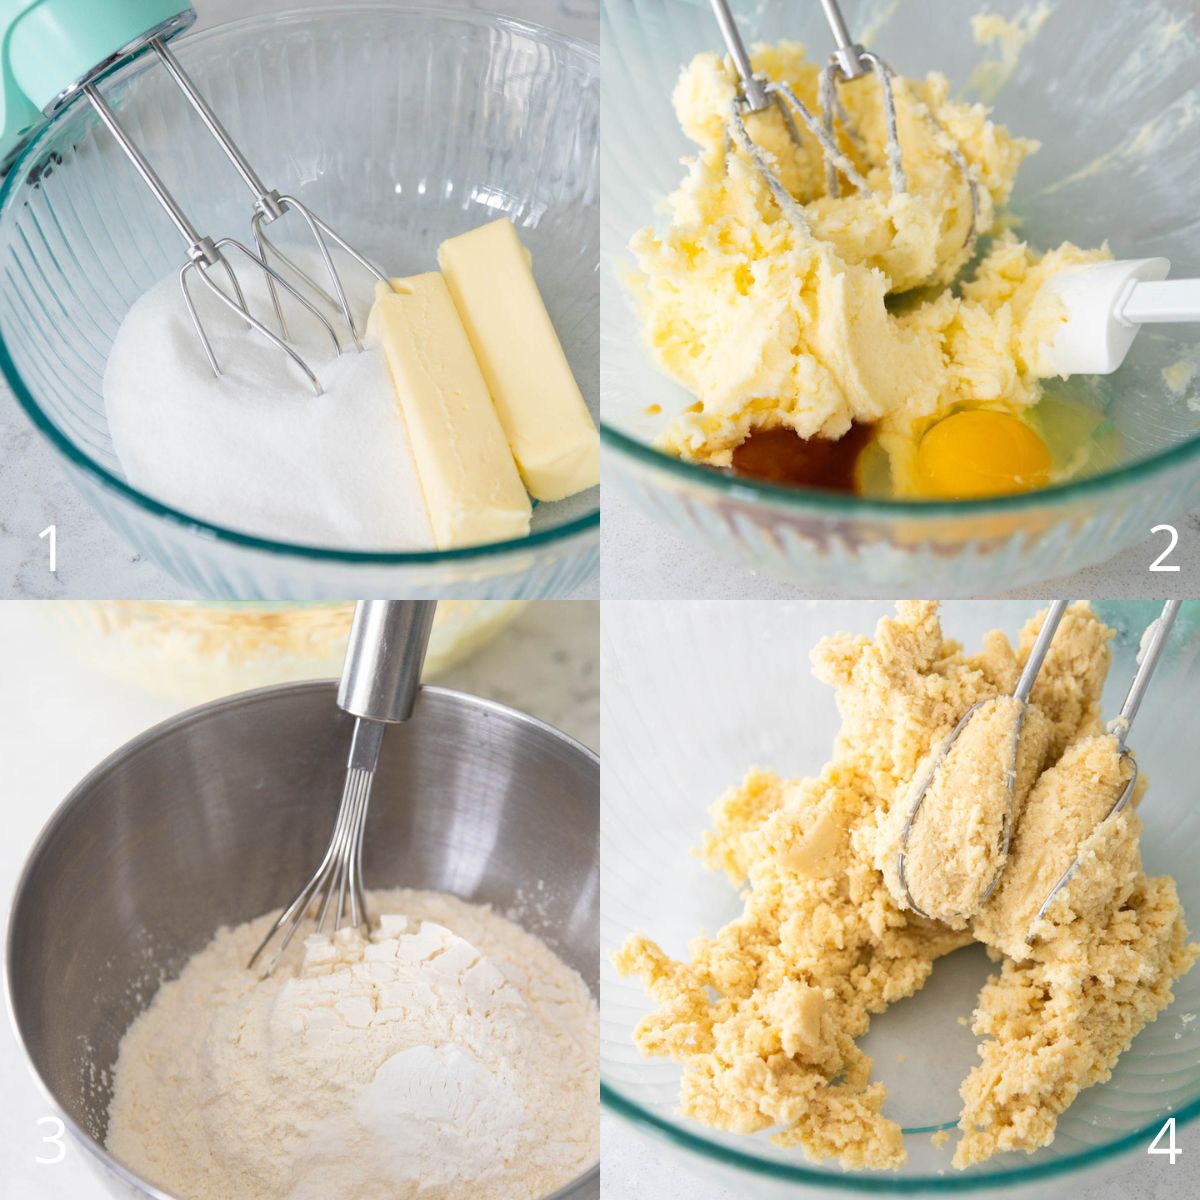 The step by step photos show how to mix the cookie dough in a mixing bowl with a hand mixer.